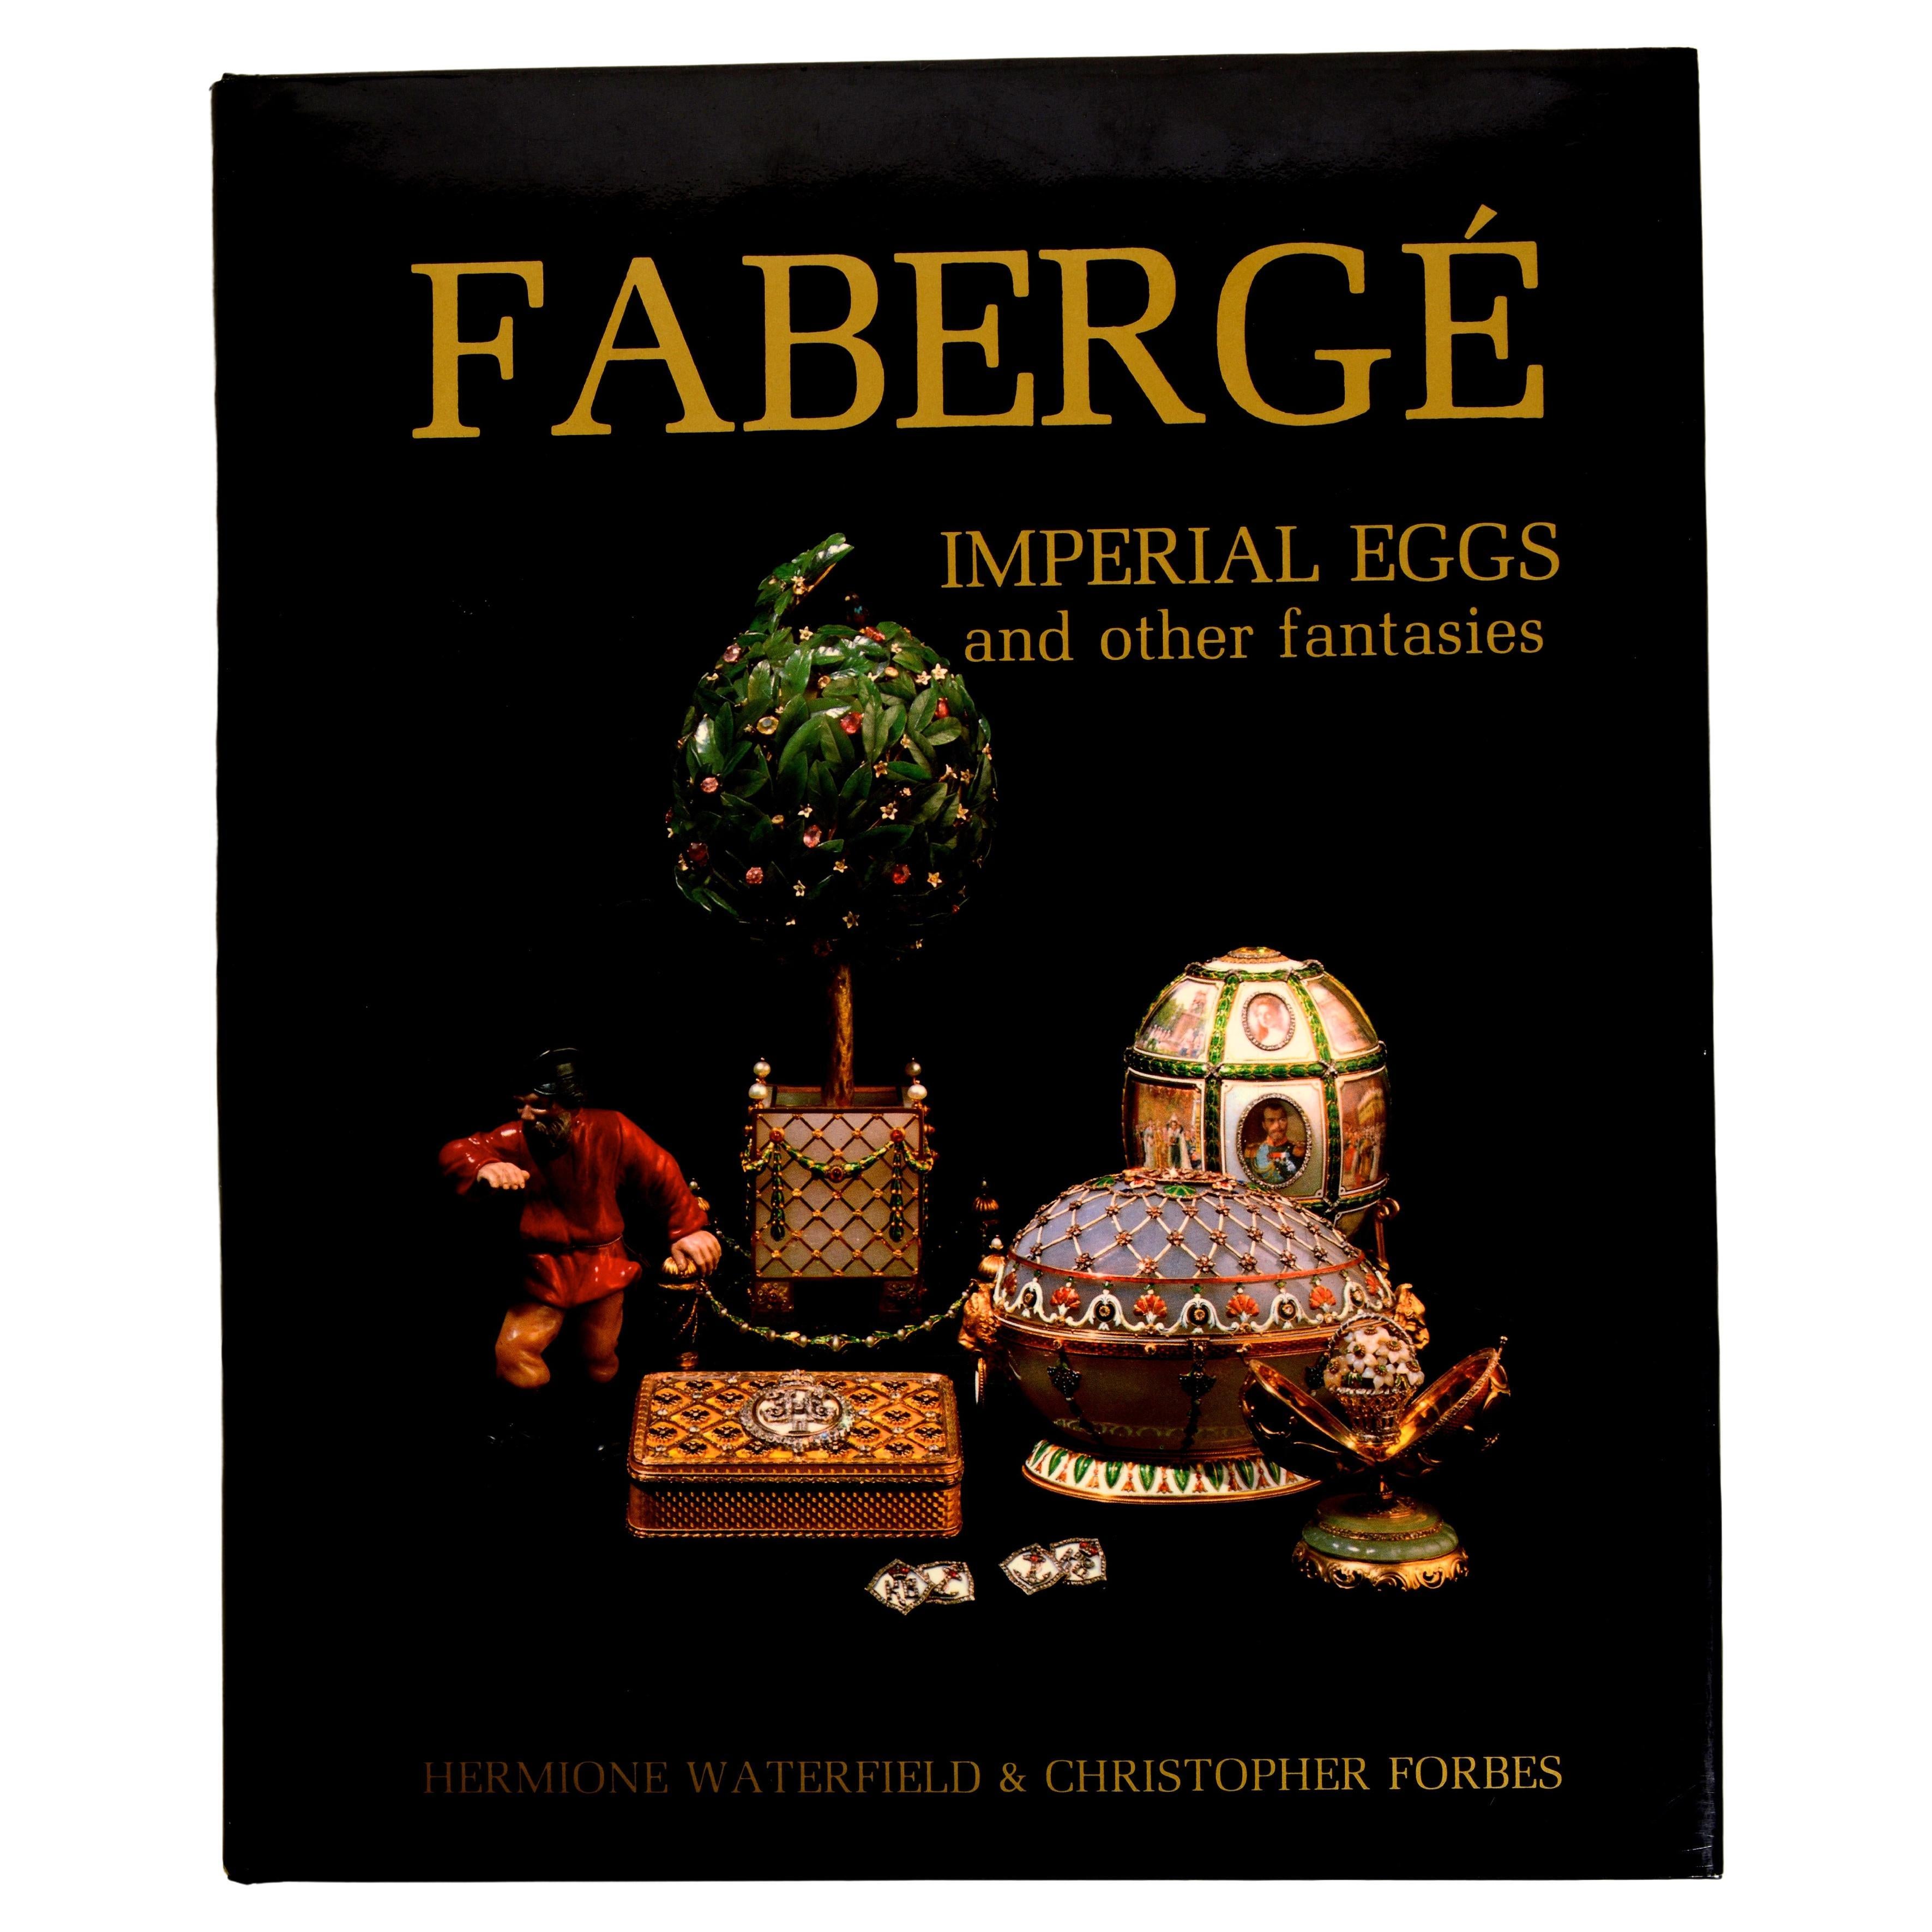 Fabergé: Imperial Eggs and Other Fantasies by Hermione Waterfield